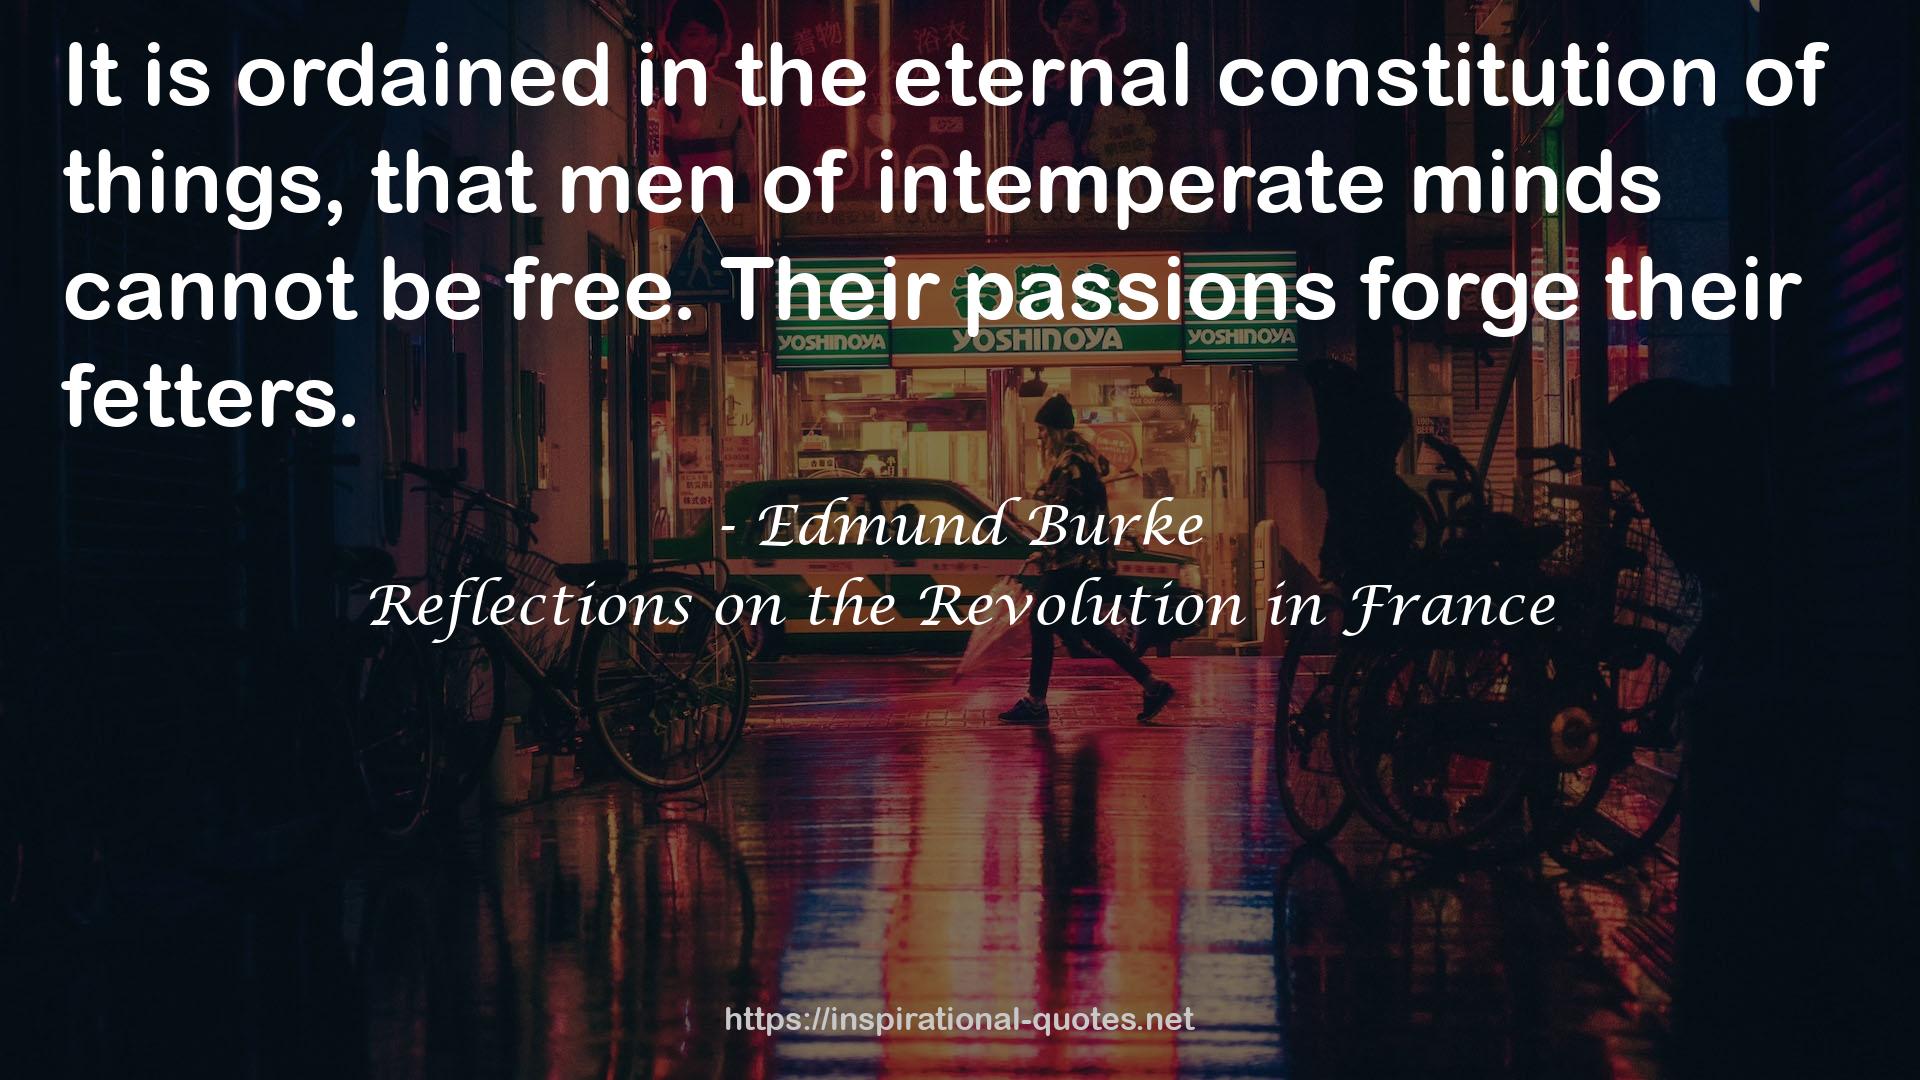 the eternal constitution  QUOTES